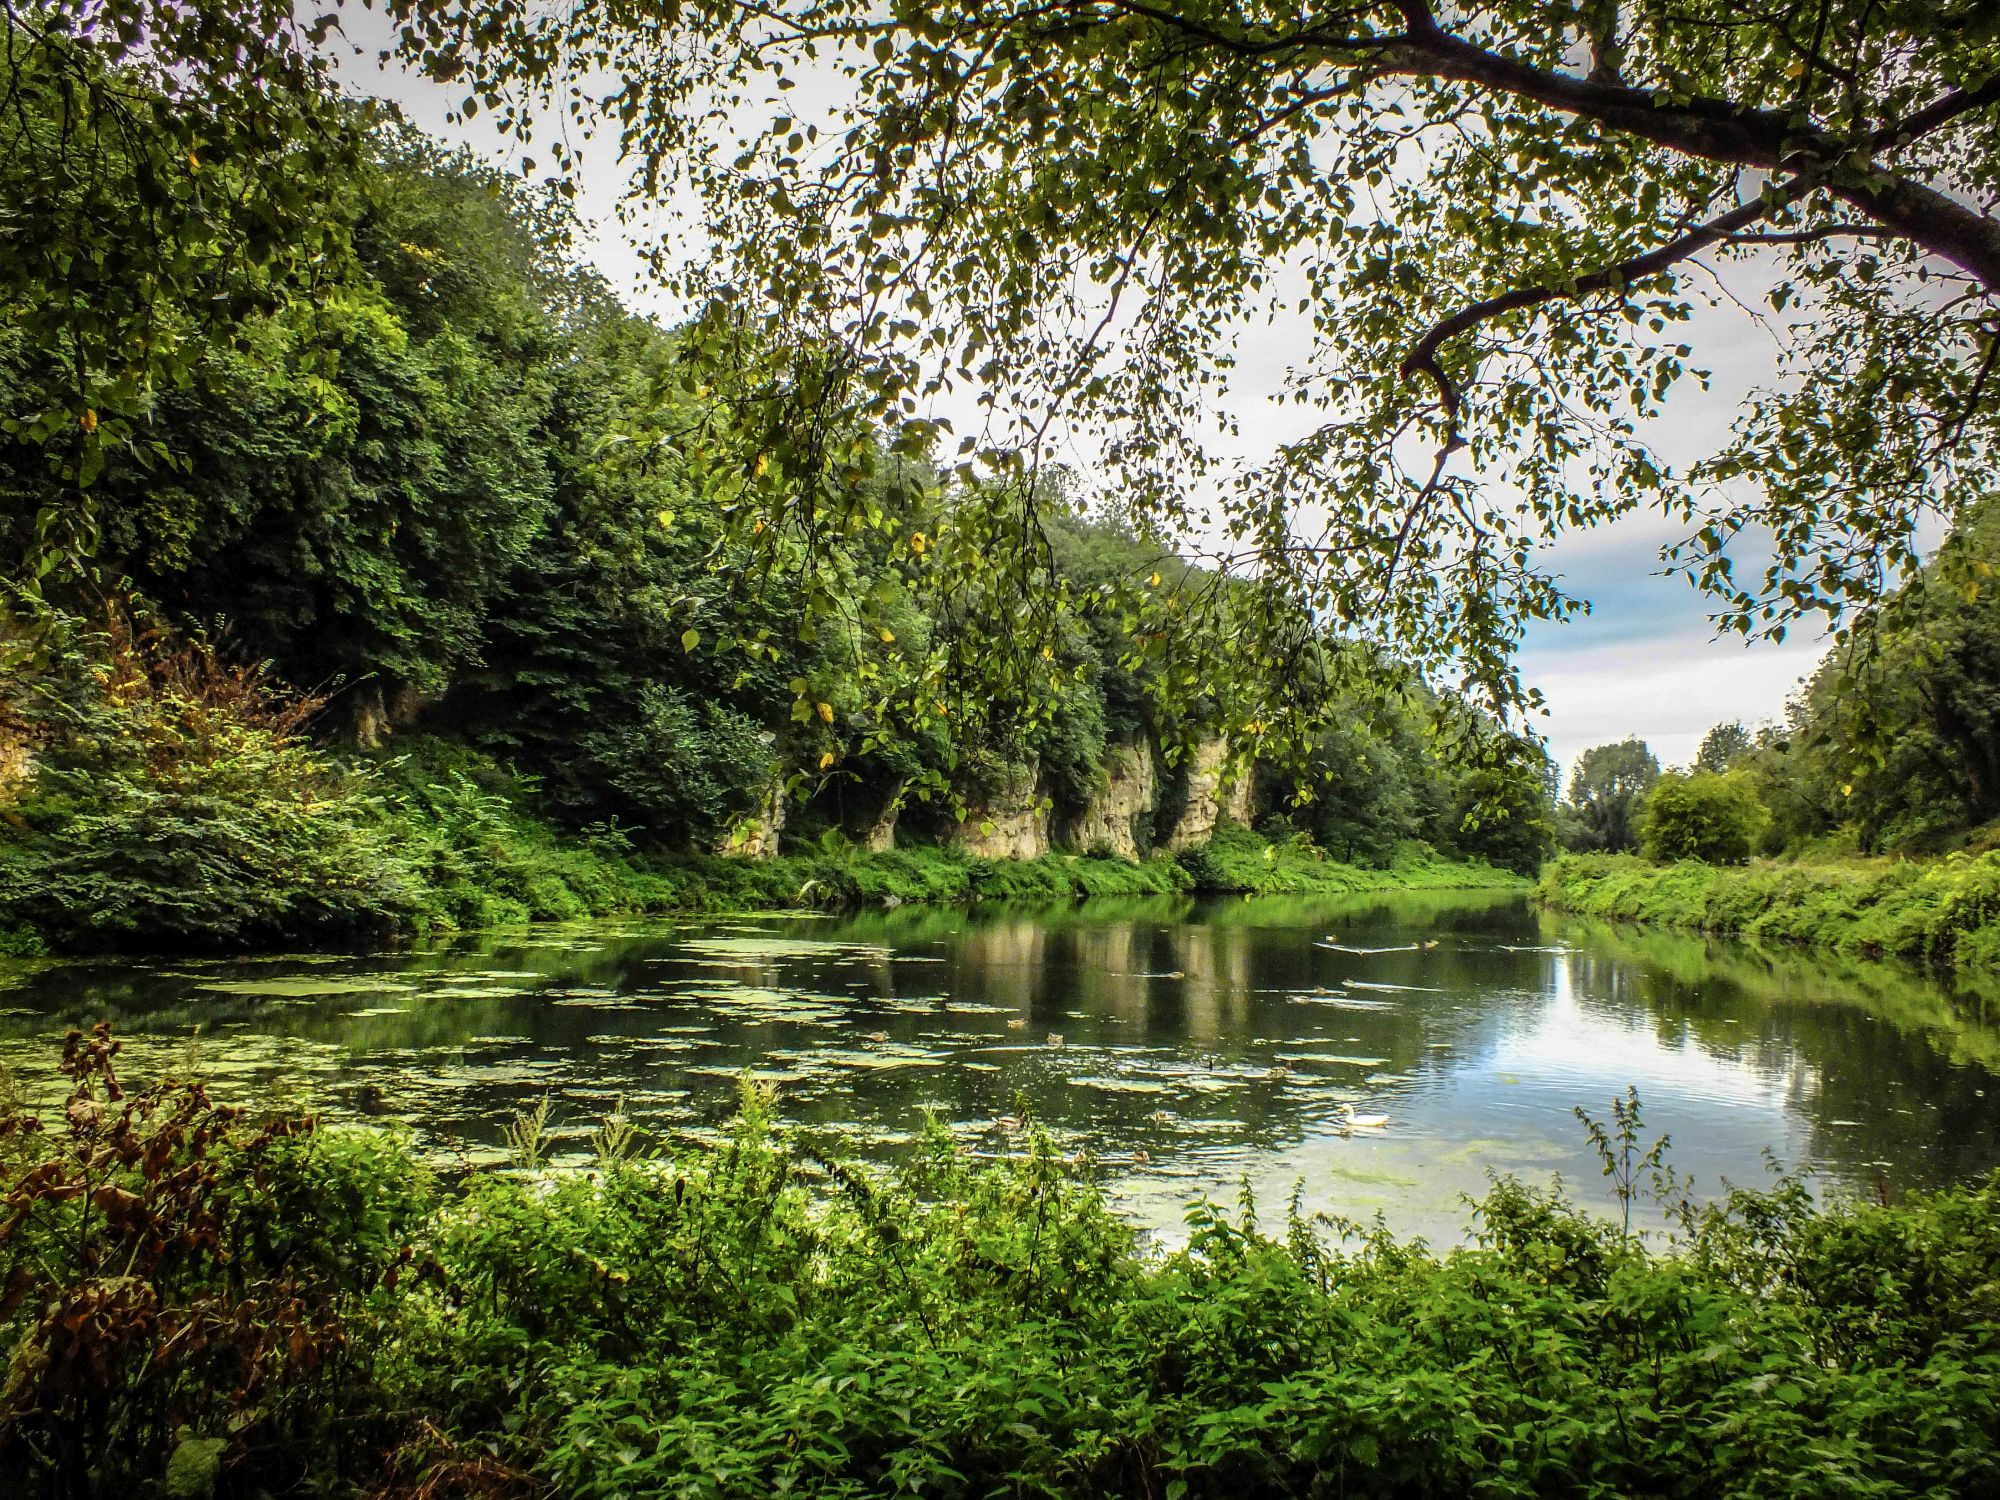 View of the lush green at Creswell Crags gorge